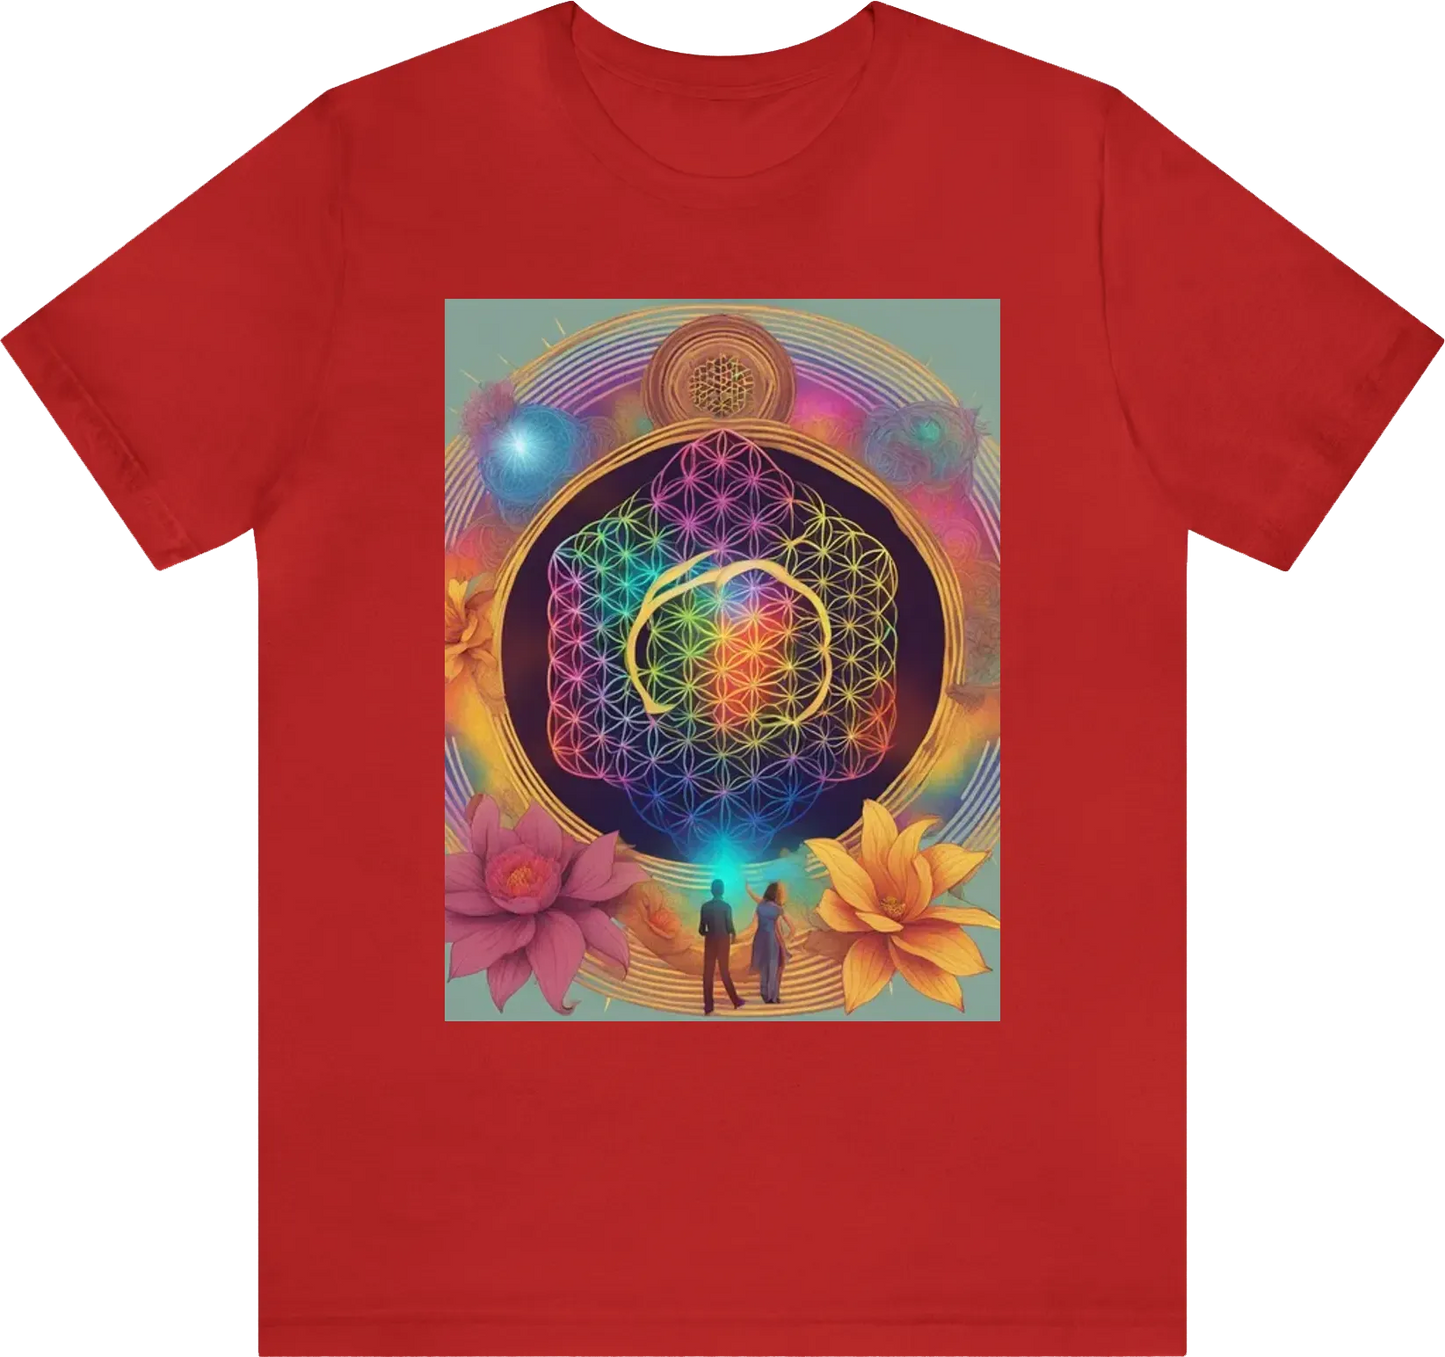 In the centre of the tshirt feature the flower of life in colour with a human stood verically threw the flower of life with a radiant light coming from the chest of the human surrounded by the 7 charakas in neon colour